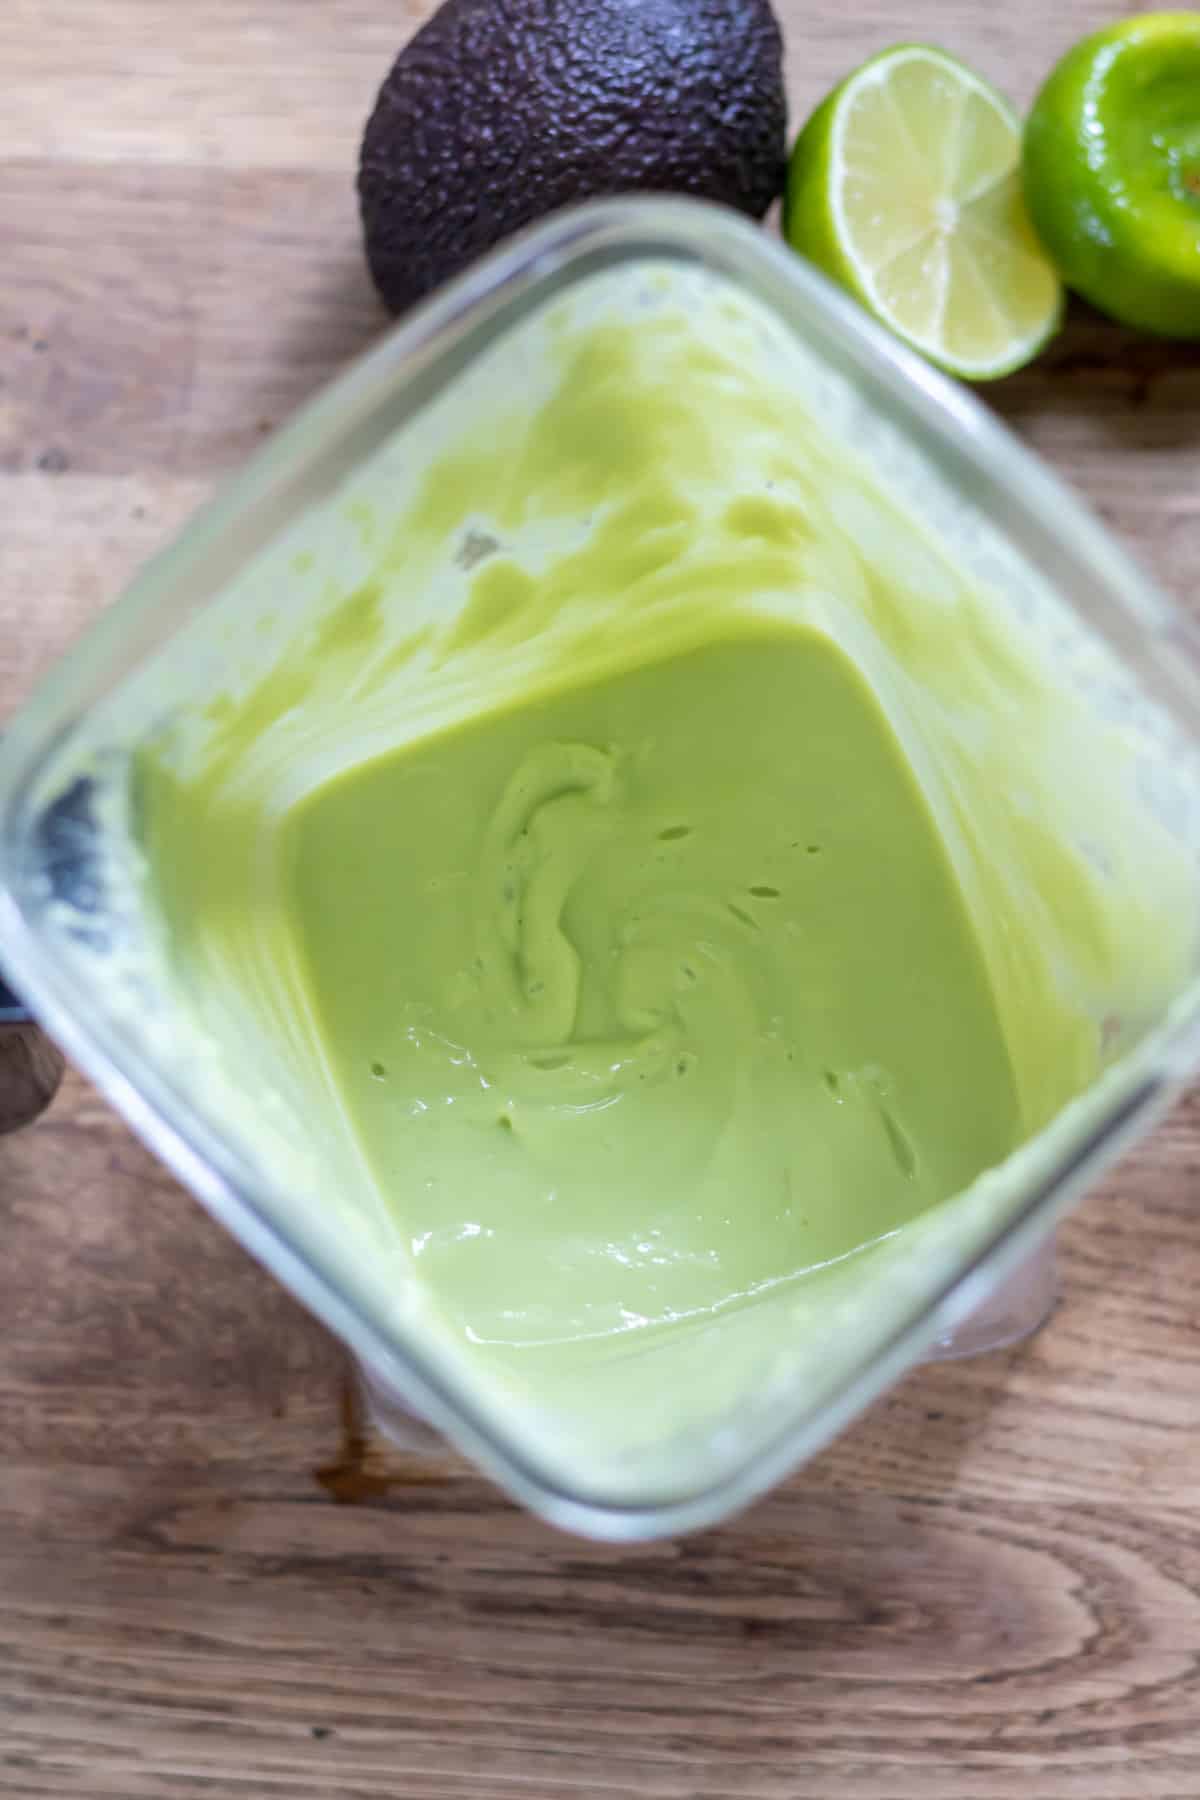 Blended lime avocado mixture.